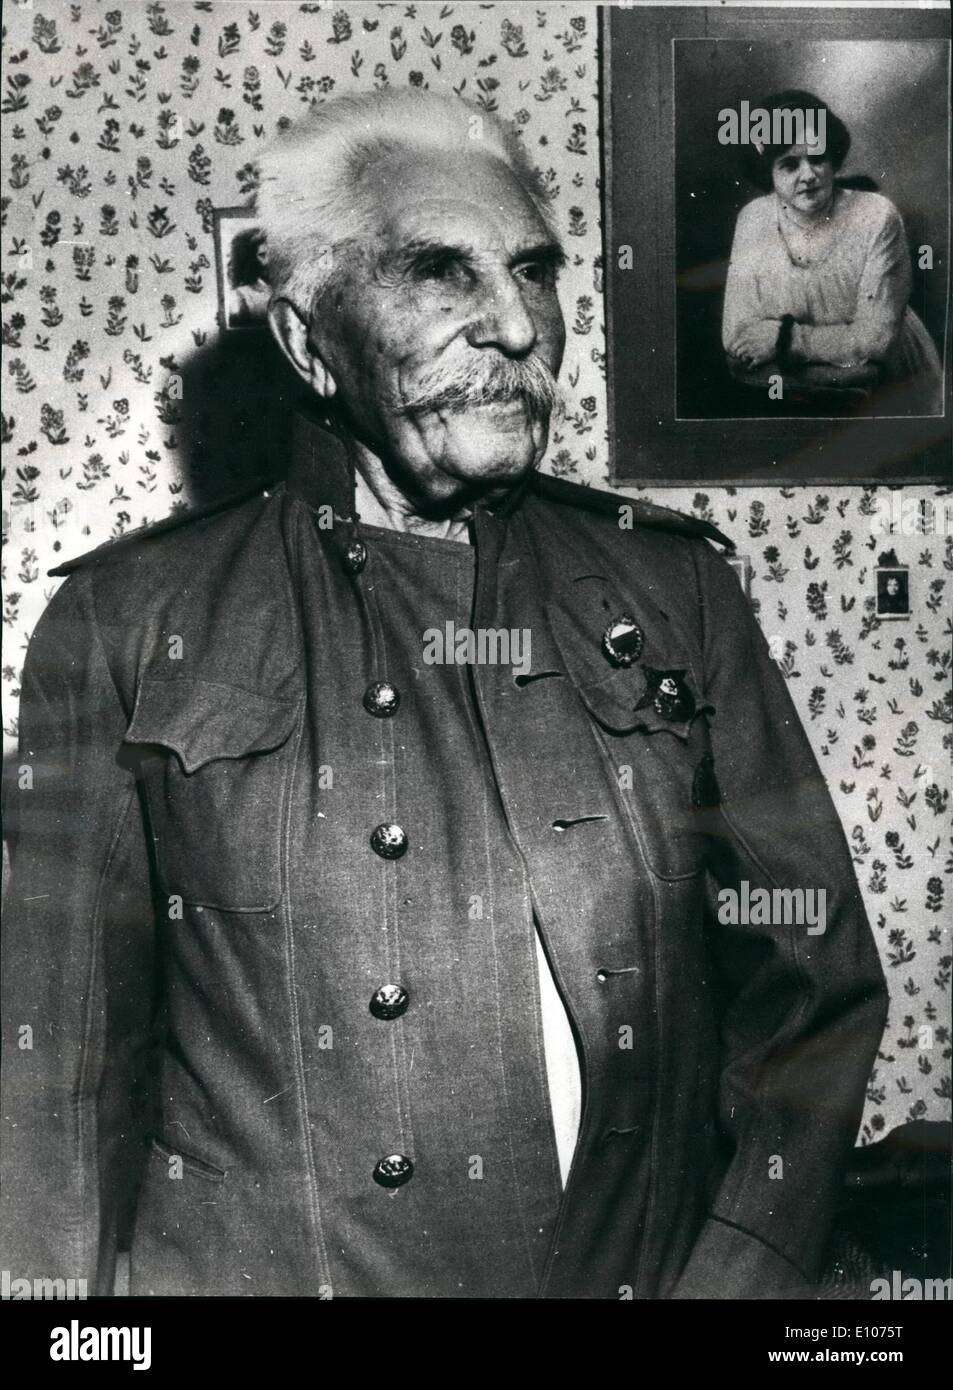 Feb. 02, 1970 - Czarist Refugees ' Community, Luserna [Near Turin], Italy Photo shows Colonel Vassilj Skrotsky wearing the old uniform of the colonel of the Ussarc and posing in front of the pictures of his wife Alexandra, died some years ago. On the uniform he has the badge that he received when he attended at the Olimpic Games in Sweden in 1912. he is 83 and during the World War I fighteed against the German and the Austrian taking command of the regiment'' The shooters of the Siberia. Stock Photo